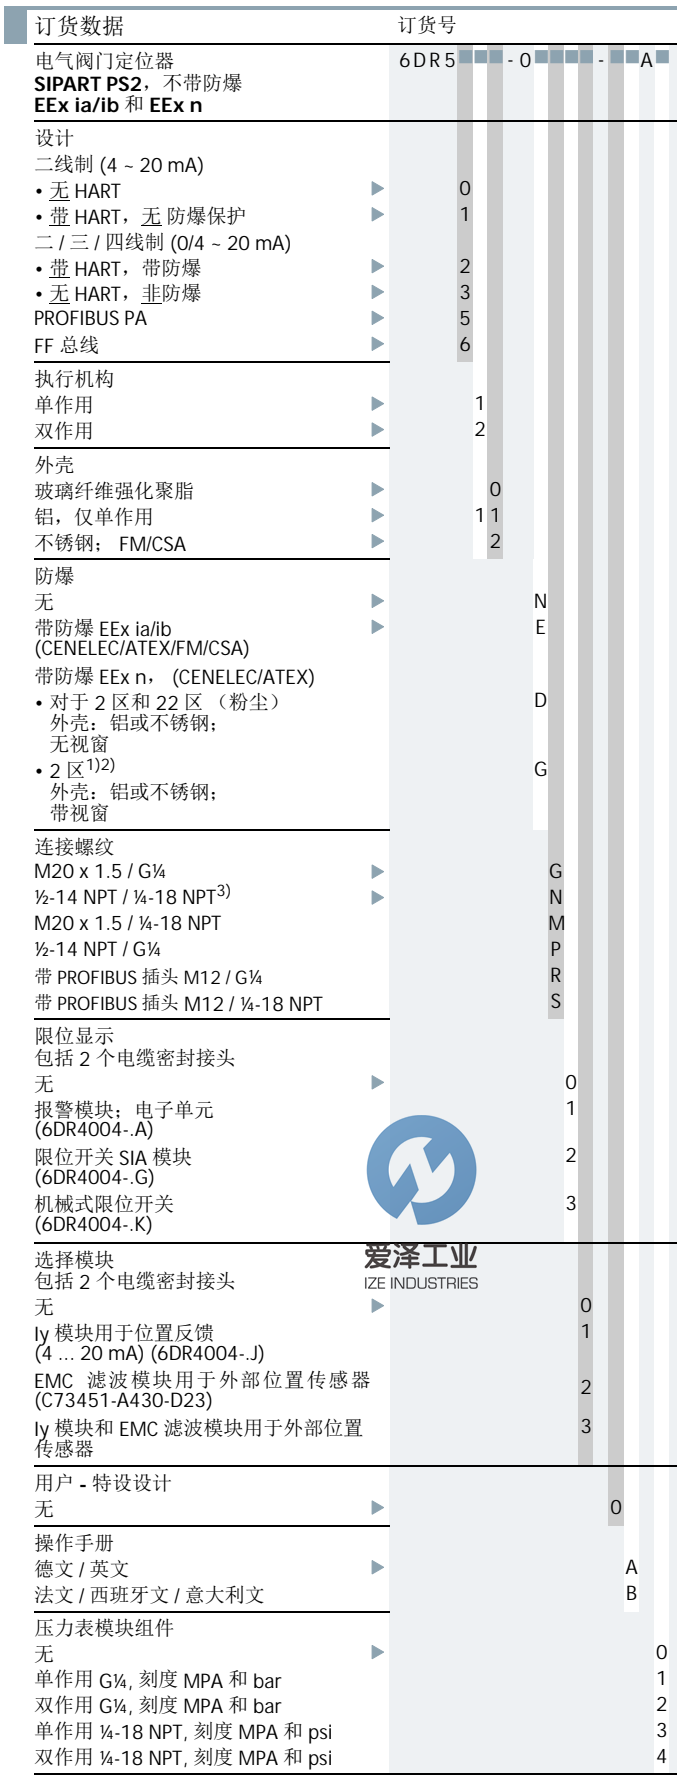 SIEMENS定位器6DR5010-0NG00-0AA0 尊龙人生就得博ize-industries (2).png